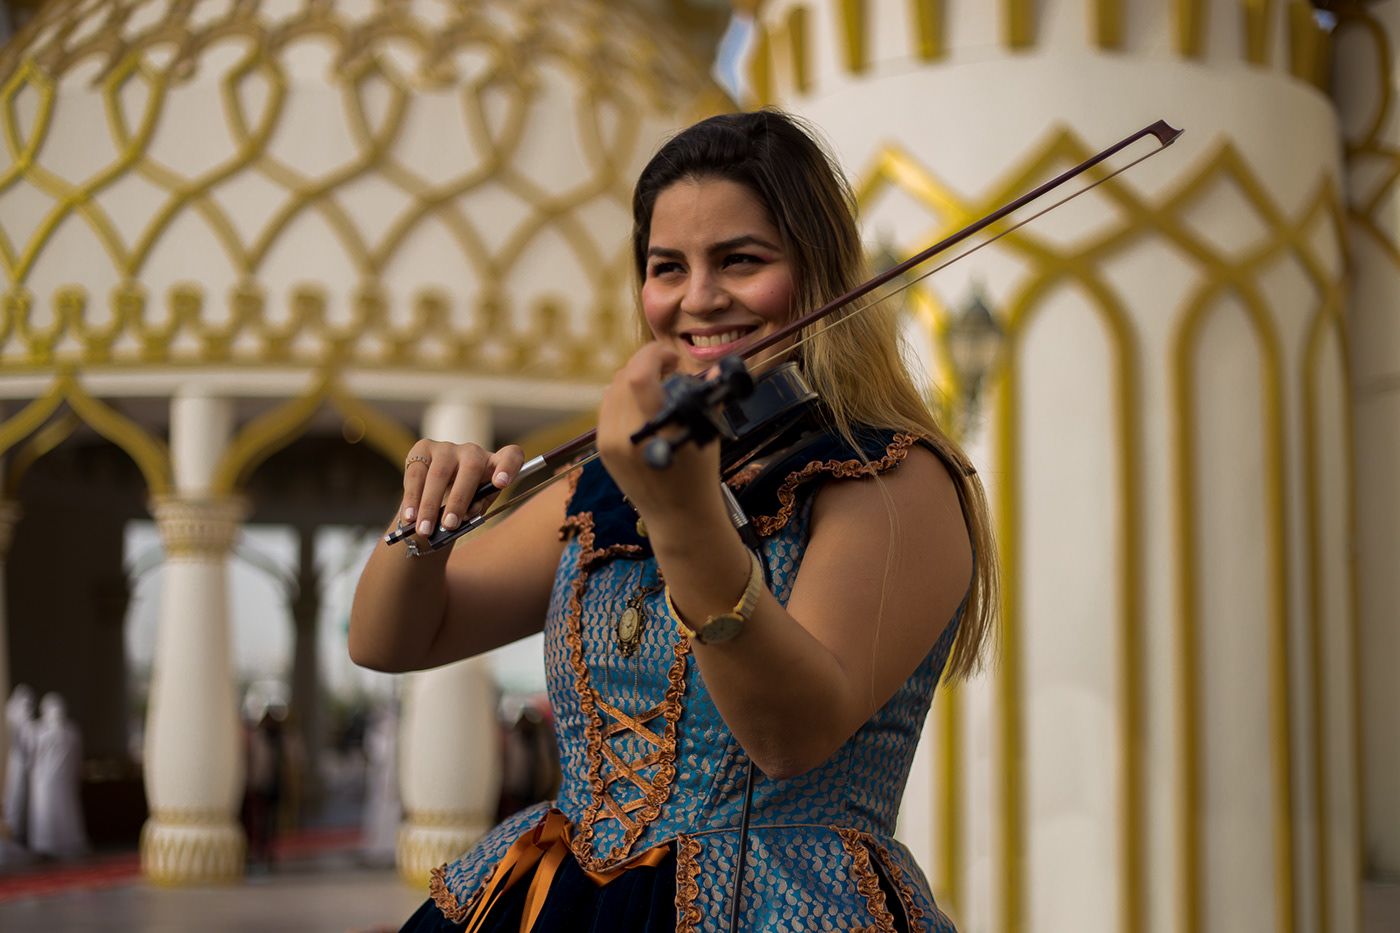 beauty Canon cultures Entrance Global human nationalities Photography  village Violin